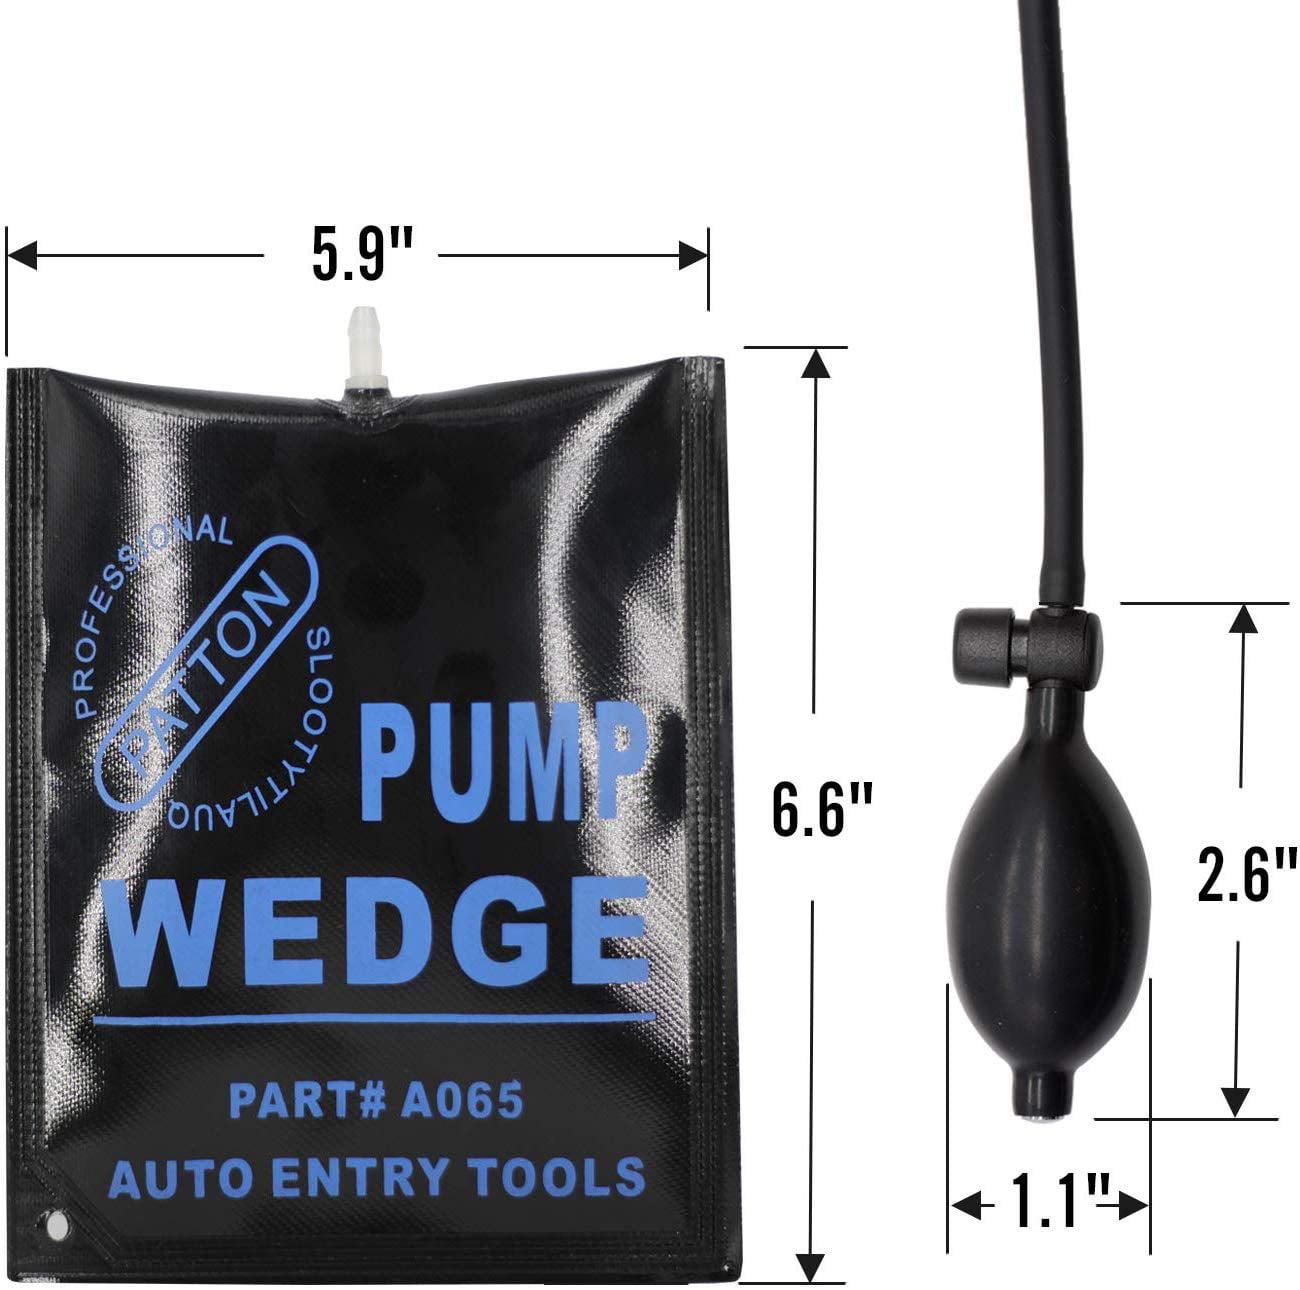 Car Air Wedge Pump 3 Sizes Air Wedge Bag Leveling kit & Alignment Tool Inflatable Shim Bag for Home and Automotive 